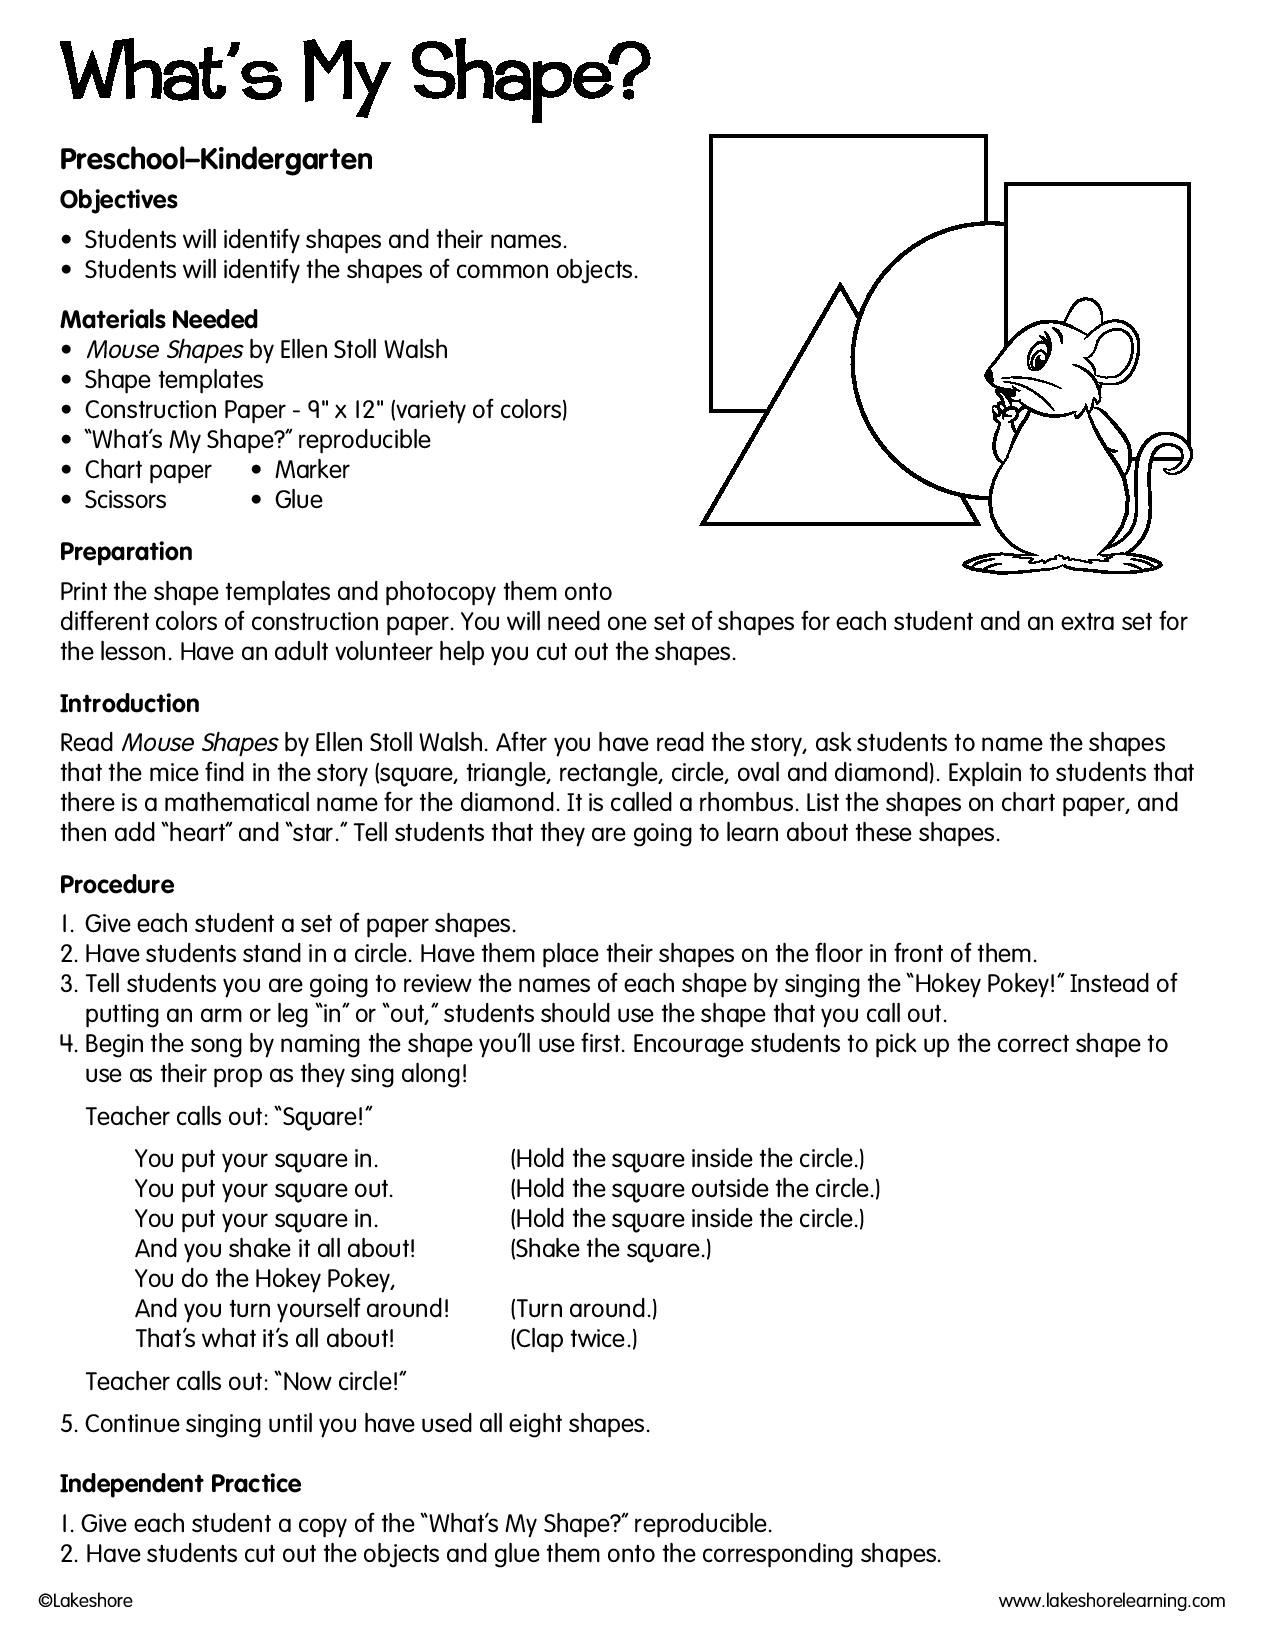 Shapes Lesson Plan for Preschool What S My Shape Lessonplan